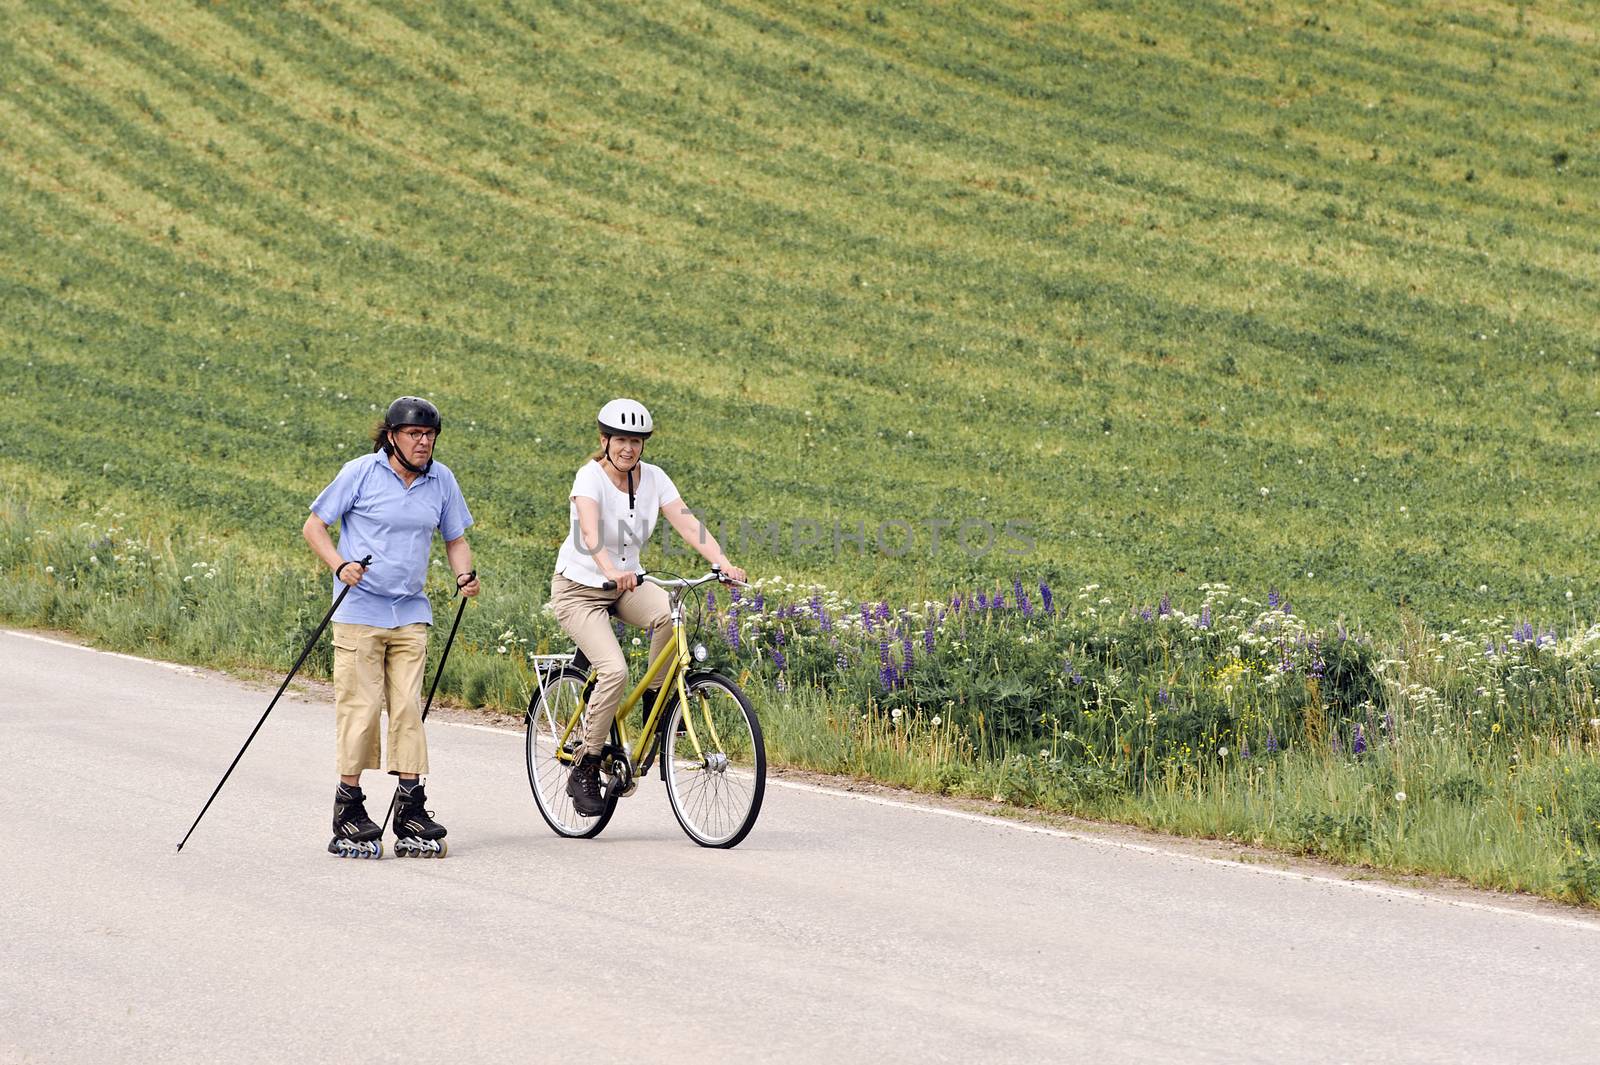 Senior couple vigorously exercising. The man is Nordic inline skating, and the woman is cycling. They're on a country road through green fields.